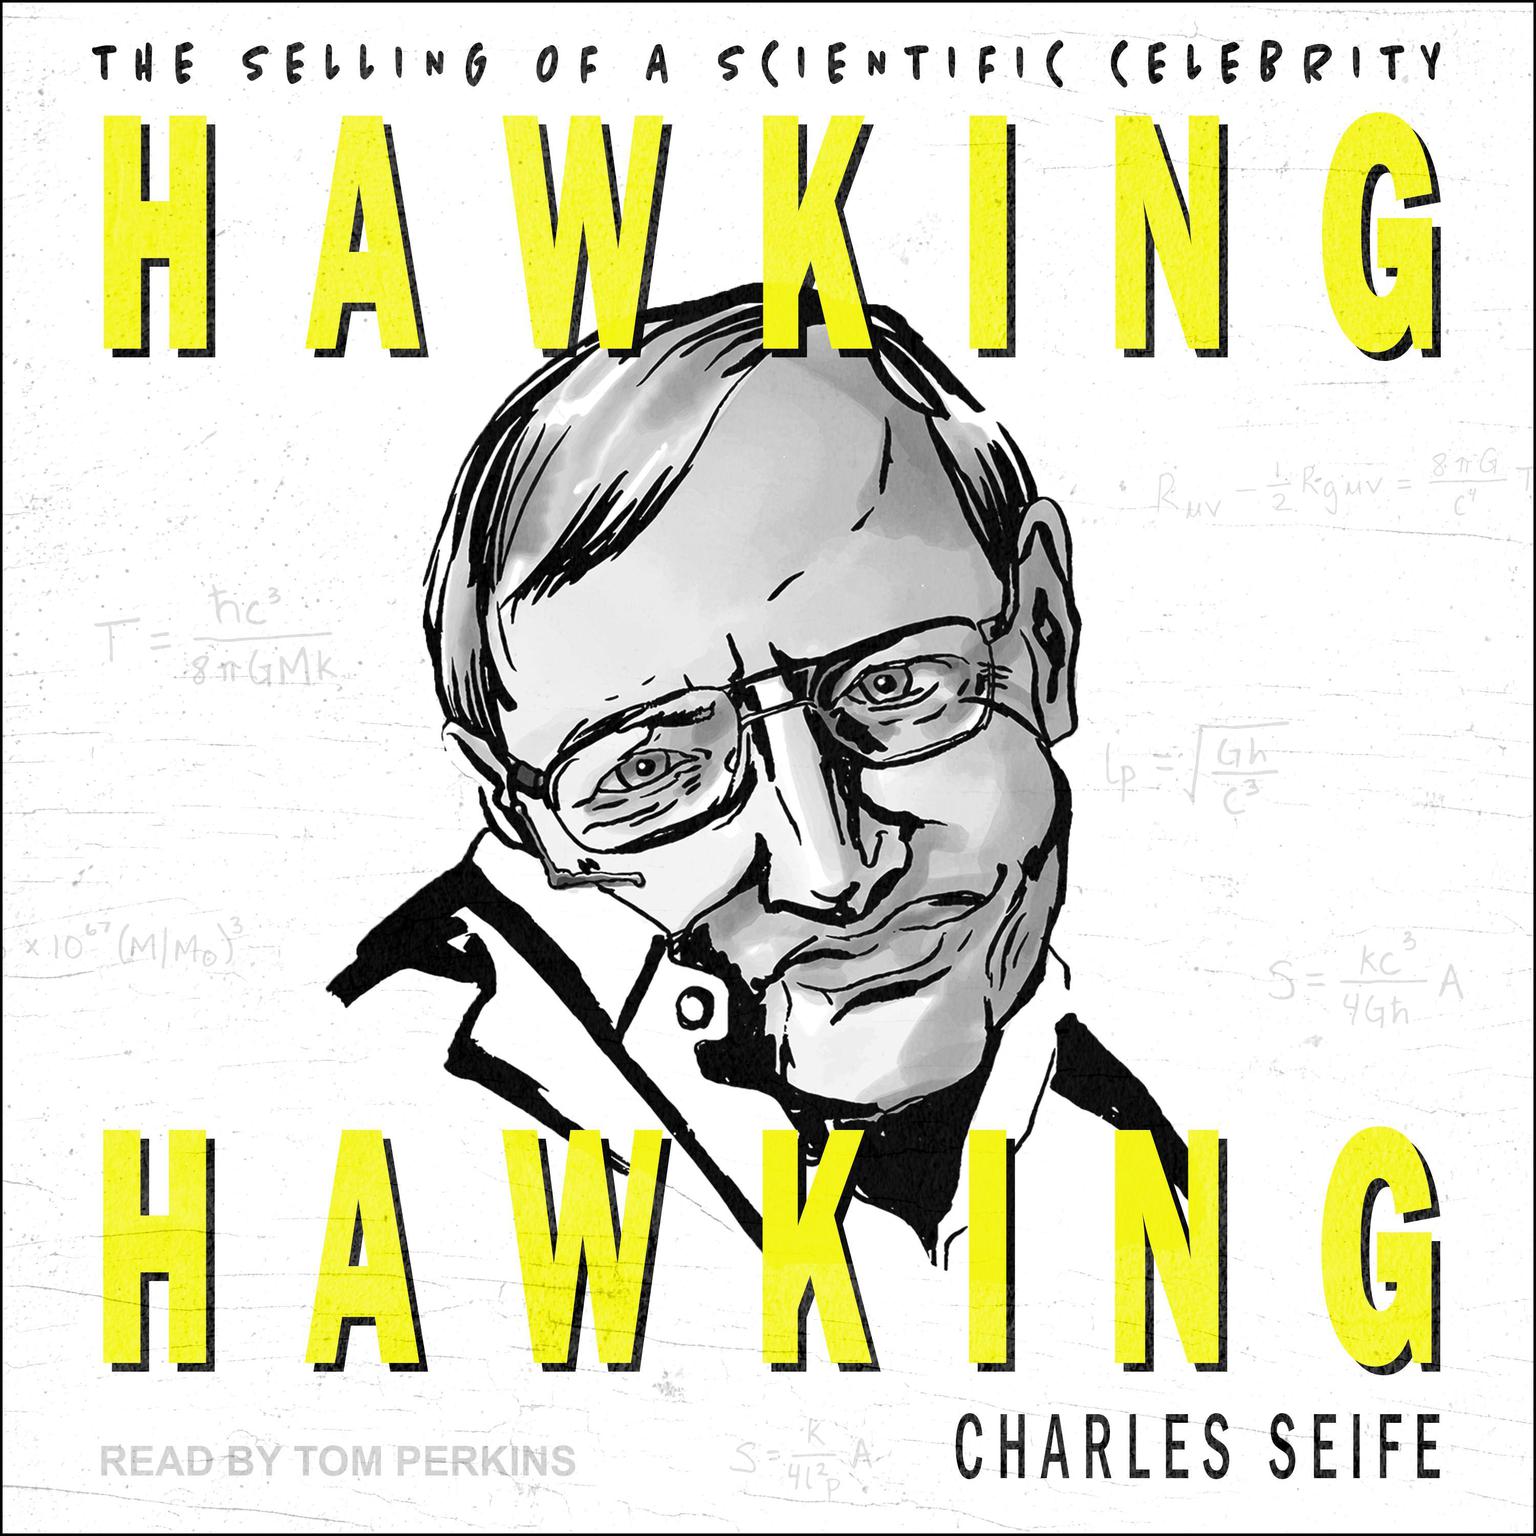 Hawking Hawking: The Selling of a Scientific Celebrity Audiobook, by Charles Seife